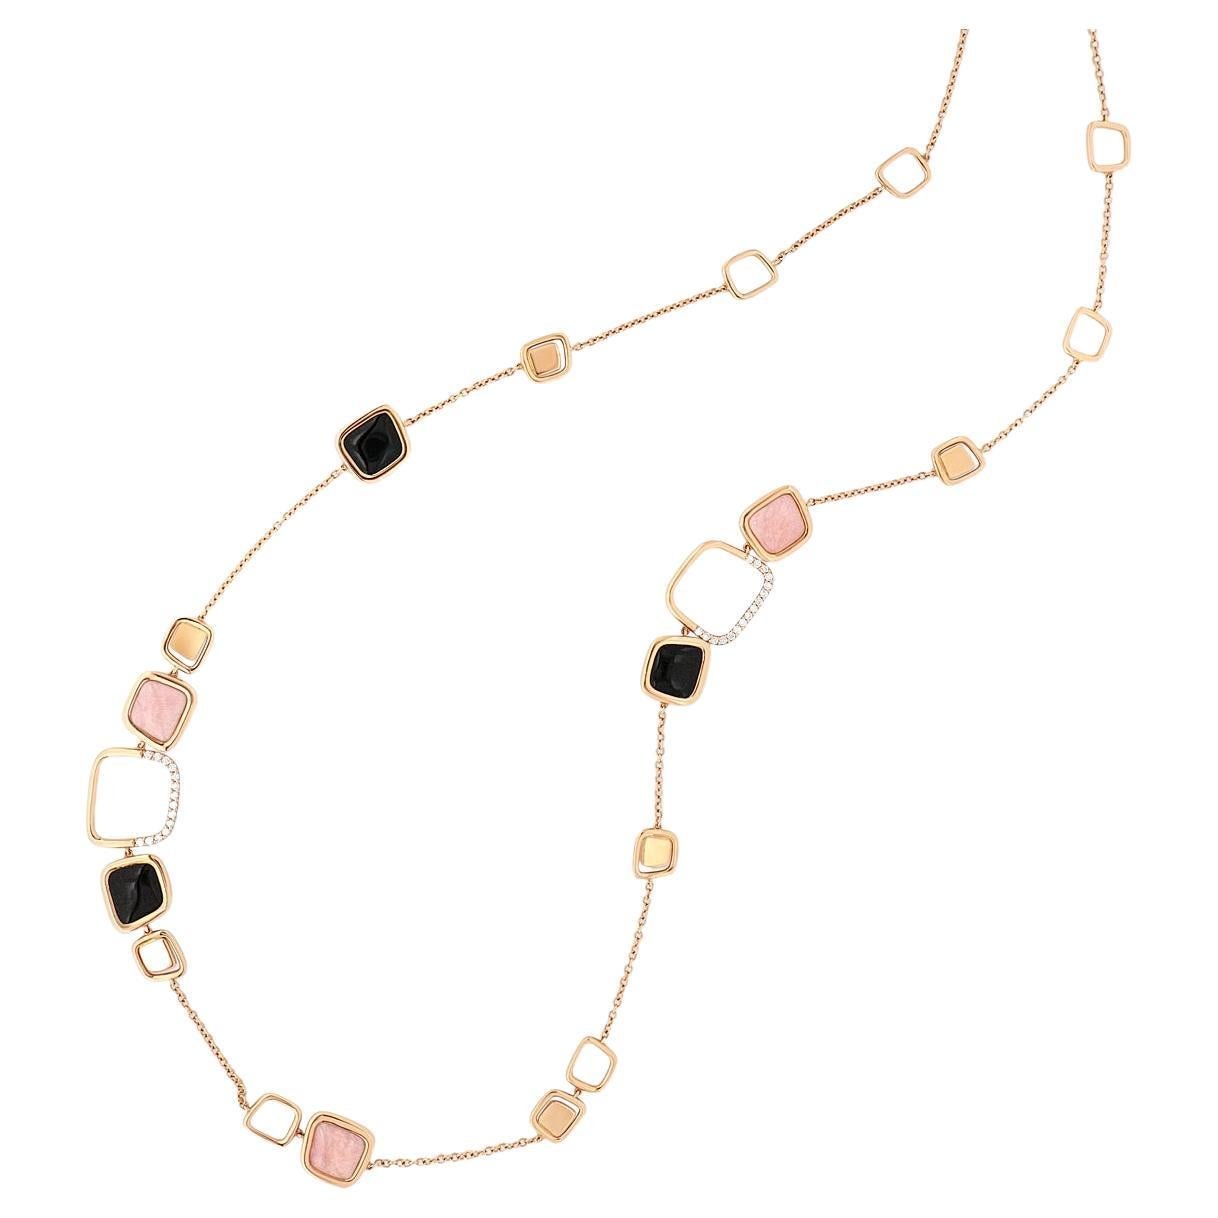 30.75ct Onyx, Pink Opal and White Diamonds Long Square Necklace in 18k Rose Gold For Sale